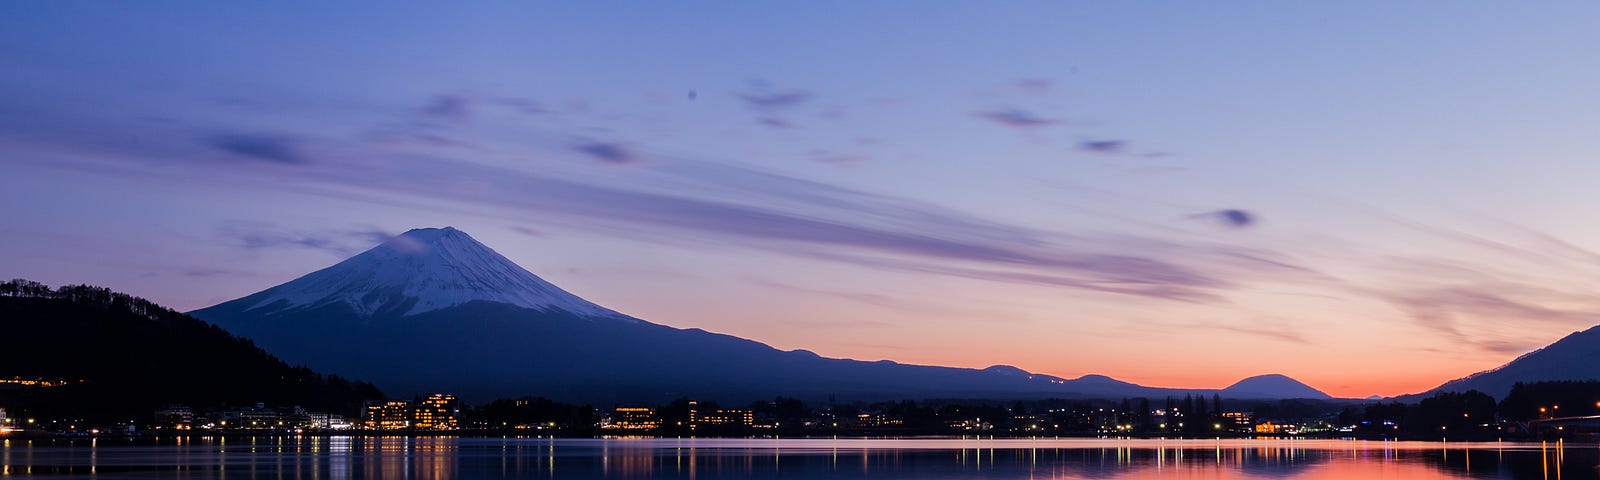 6 Mindful Ways to Slow Your Life Down — Mount Fuji and Lake